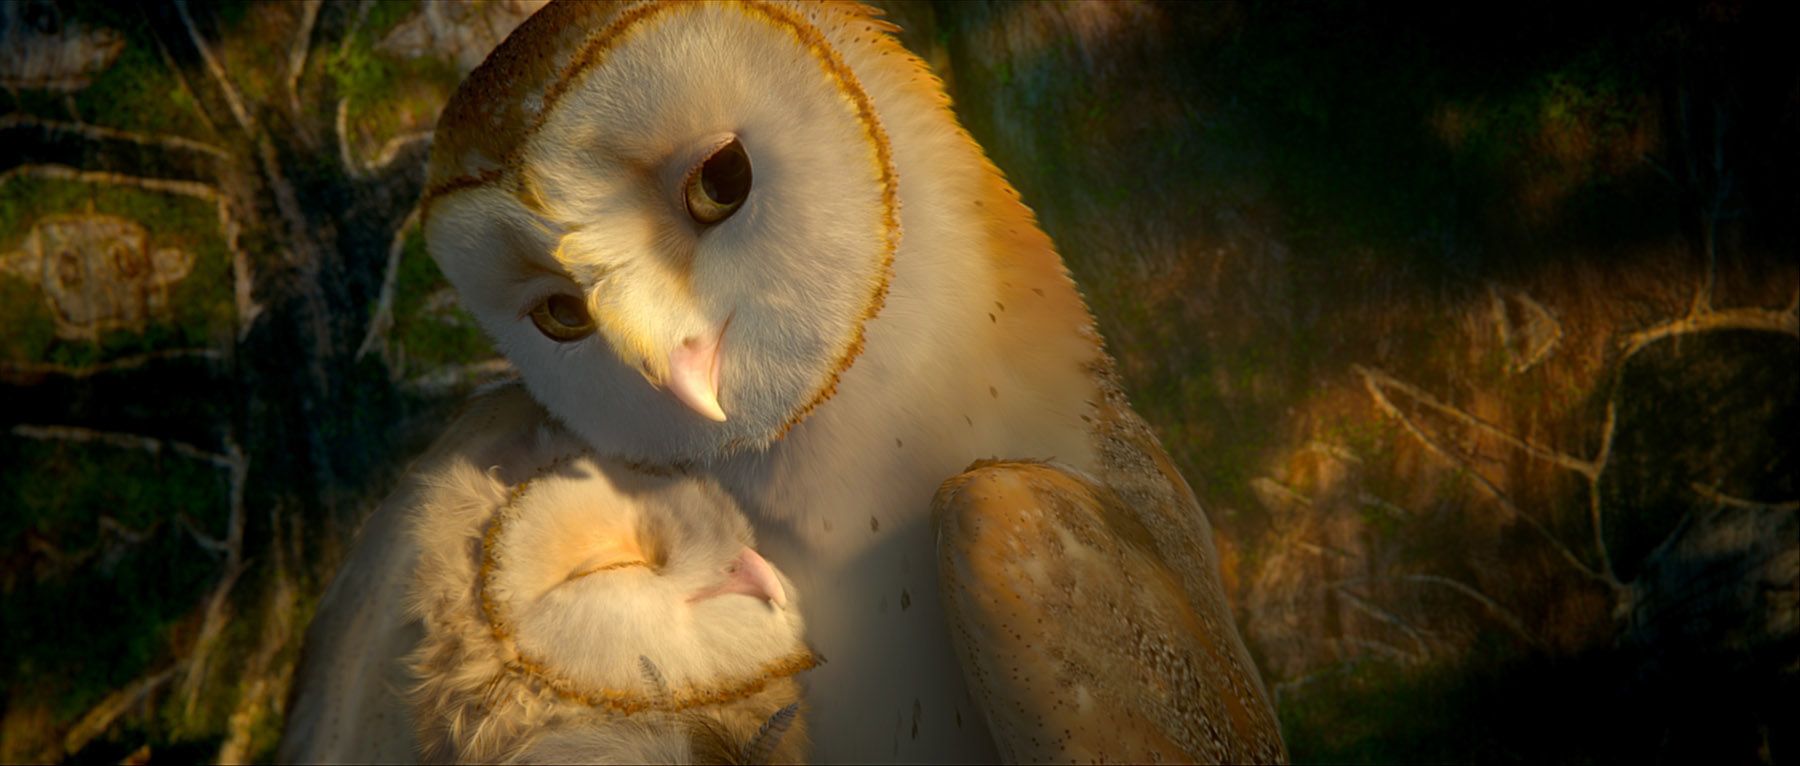 Legend of the Guardians: The Owls of Ga'Hoole Image #4